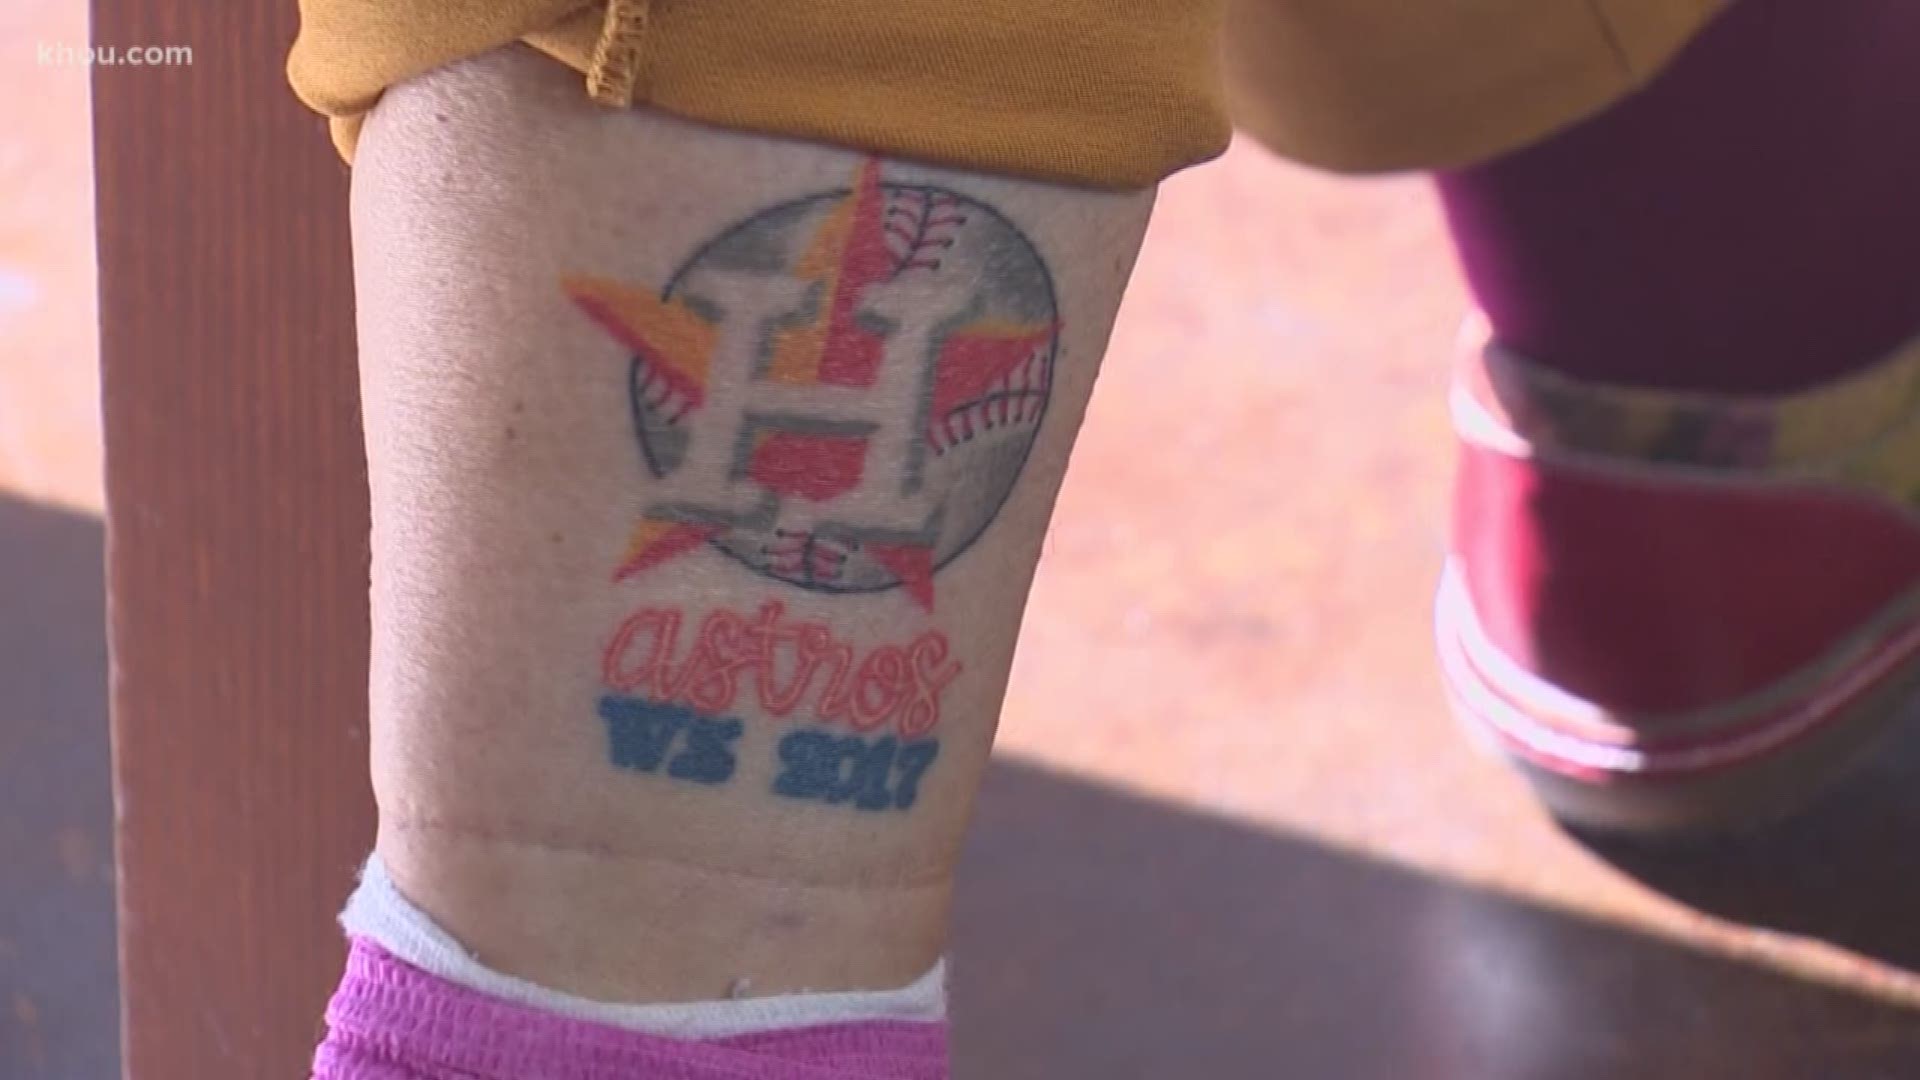 Fans are doubling down on loyalty to the Astros by proudly showing off their tattoos, which includes A.J. Hinch's signature permanently inked on a man's arm.